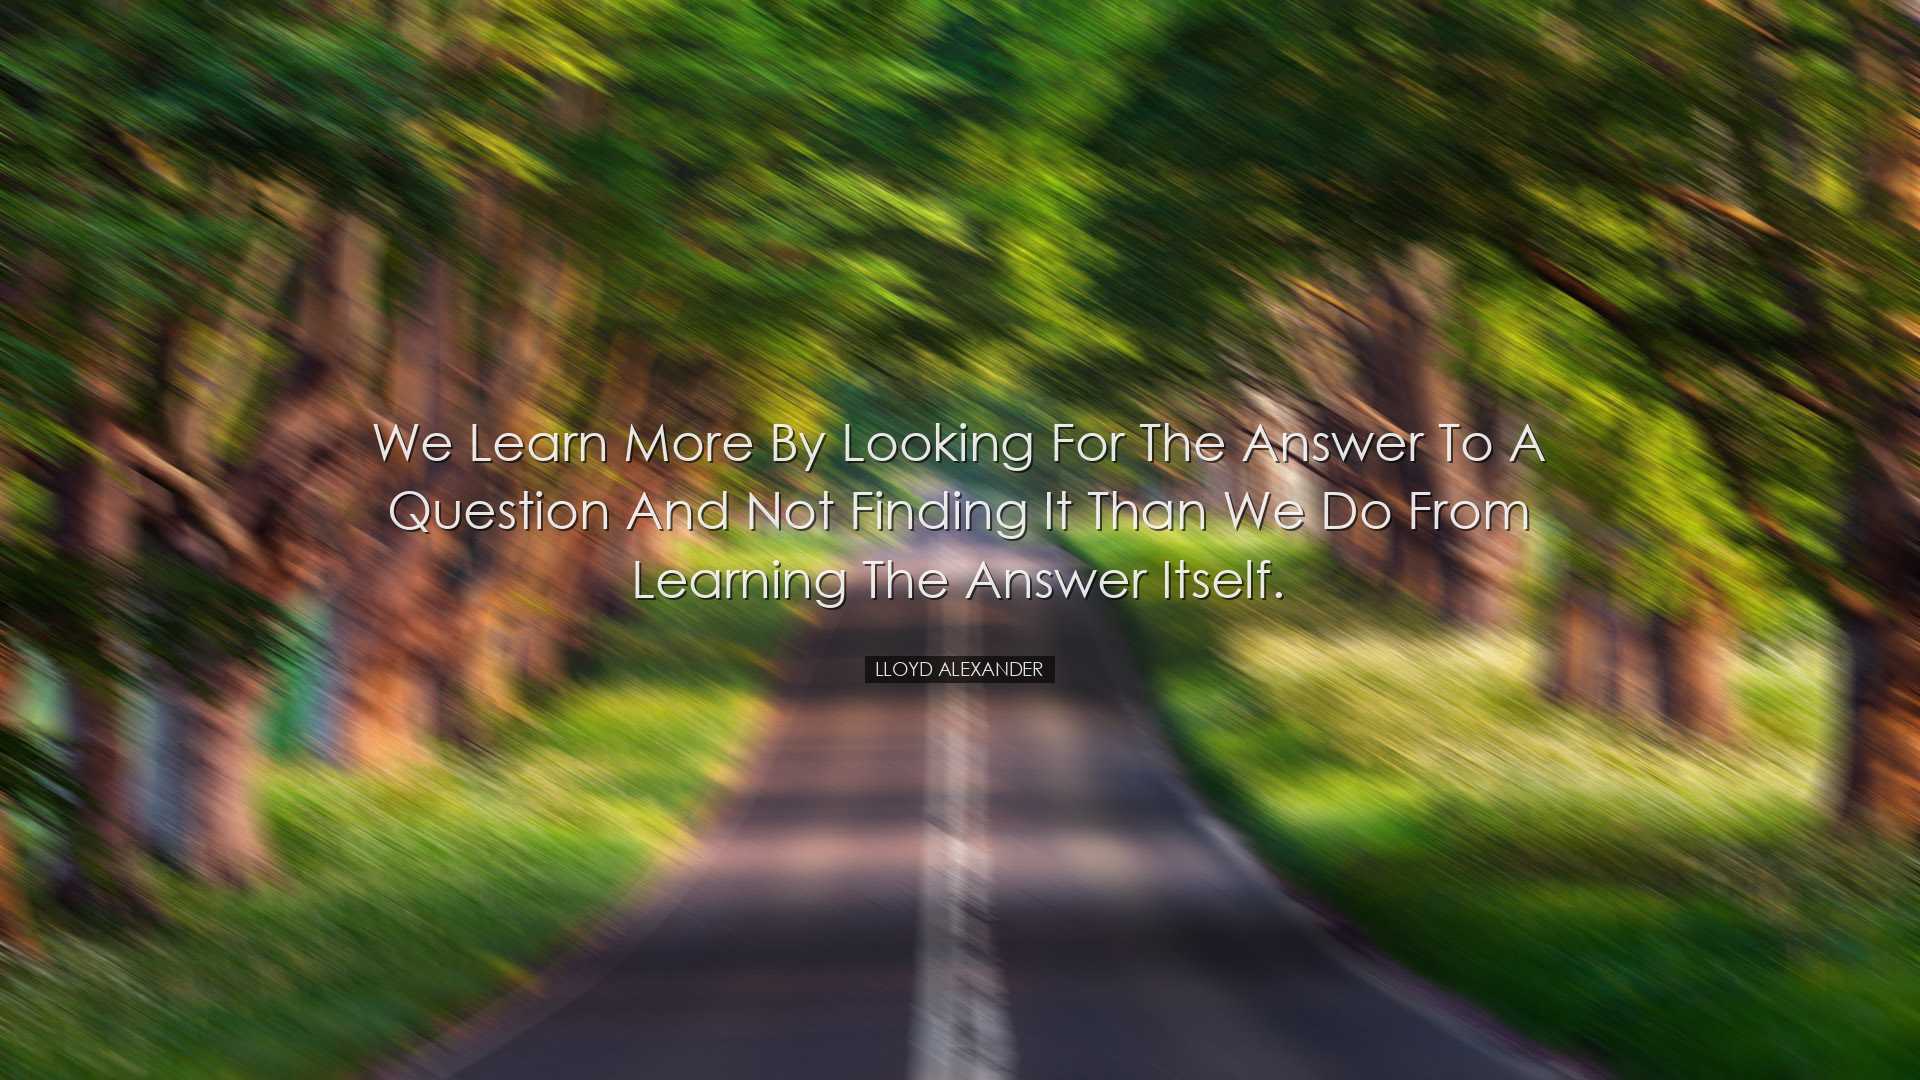 We learn more by looking for the answer to a question and not find